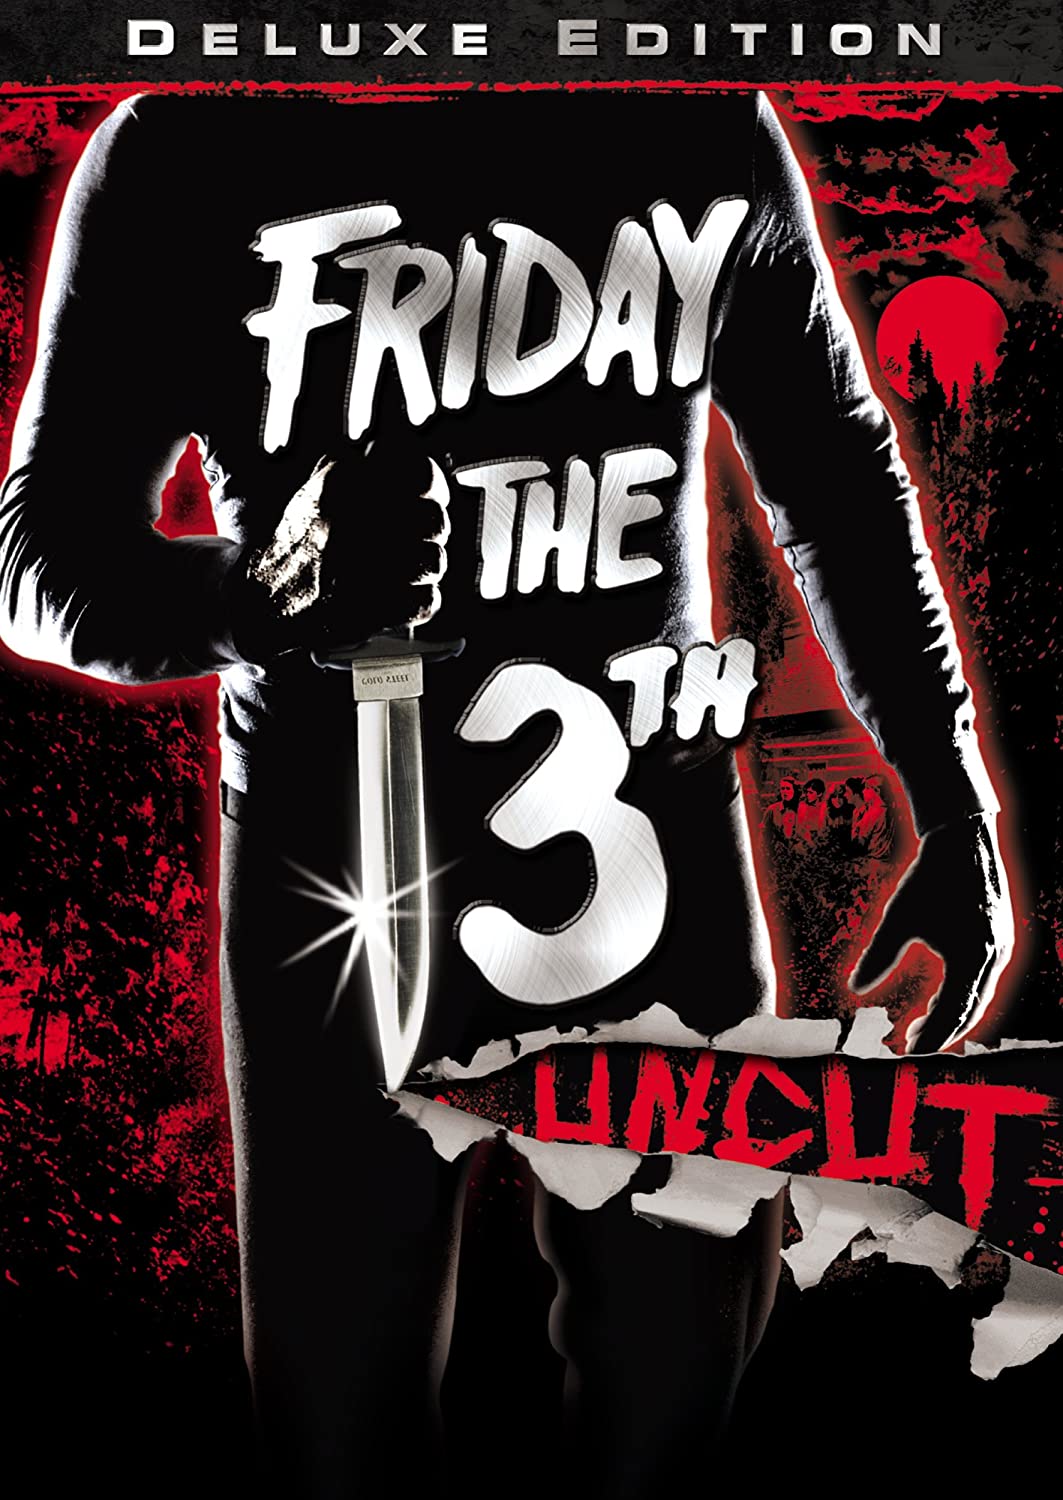 Friday The 13th [Uncut Edition] (1980) Vudu HD or iTunes HD code